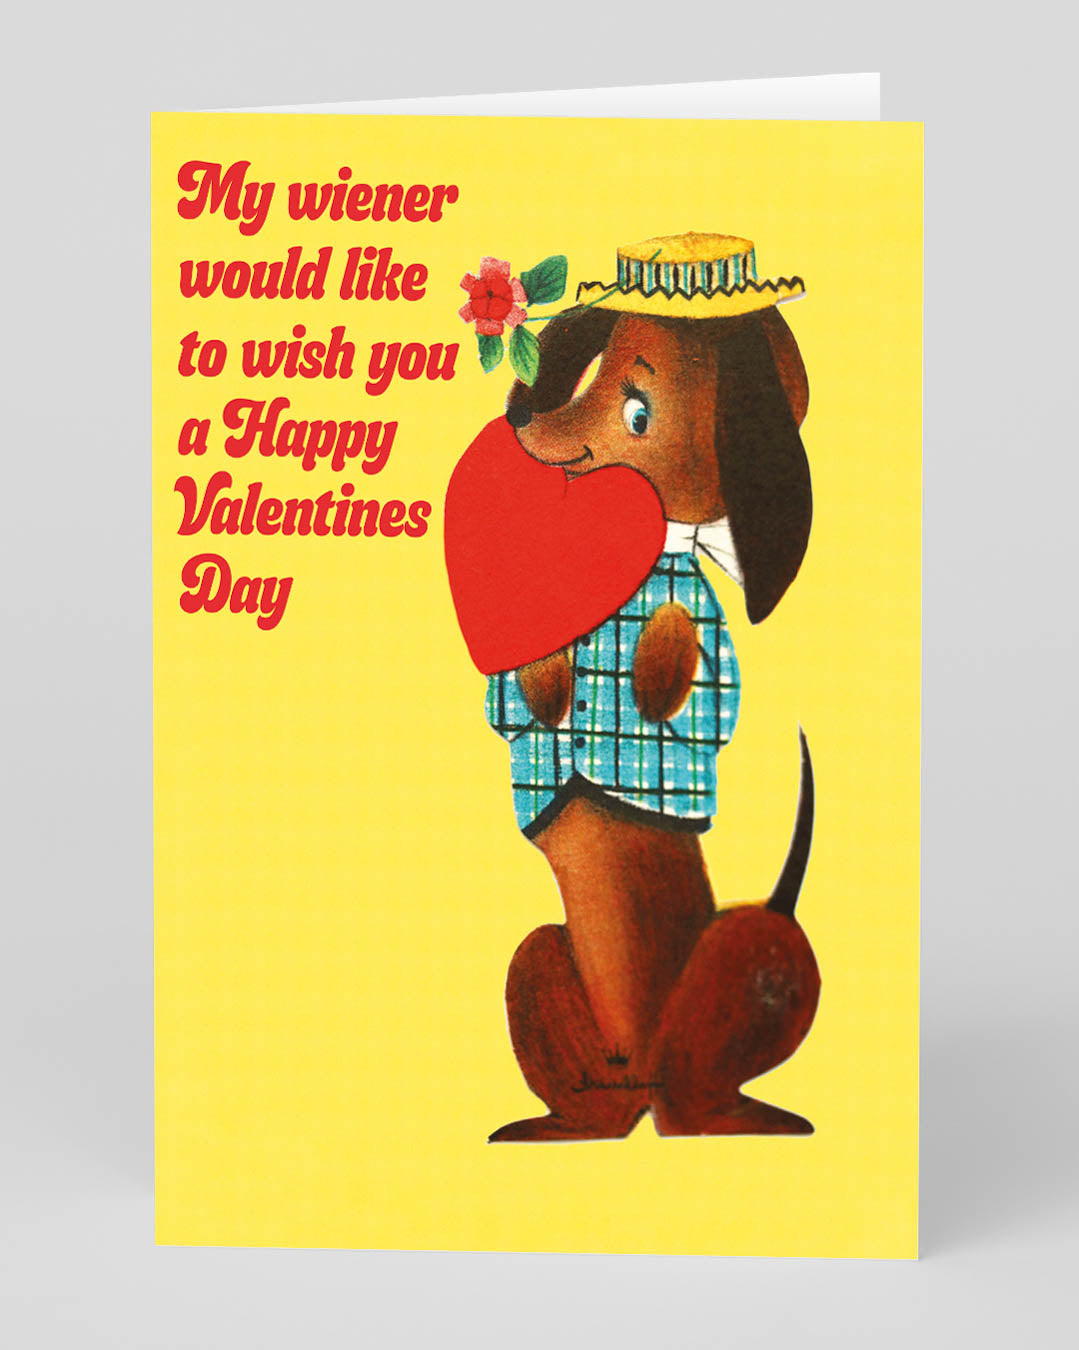 Valentine’s Day | Rude Valentines Card For Dog Lovers | Personalised My Wiener Valentine’s Day Card | Ohh Deer Unique Valentine’s Card for Her or Him | Artwork by Smitten Kitten | Made In The UK, Eco-Friendly Materials, Plastic Free Packaging